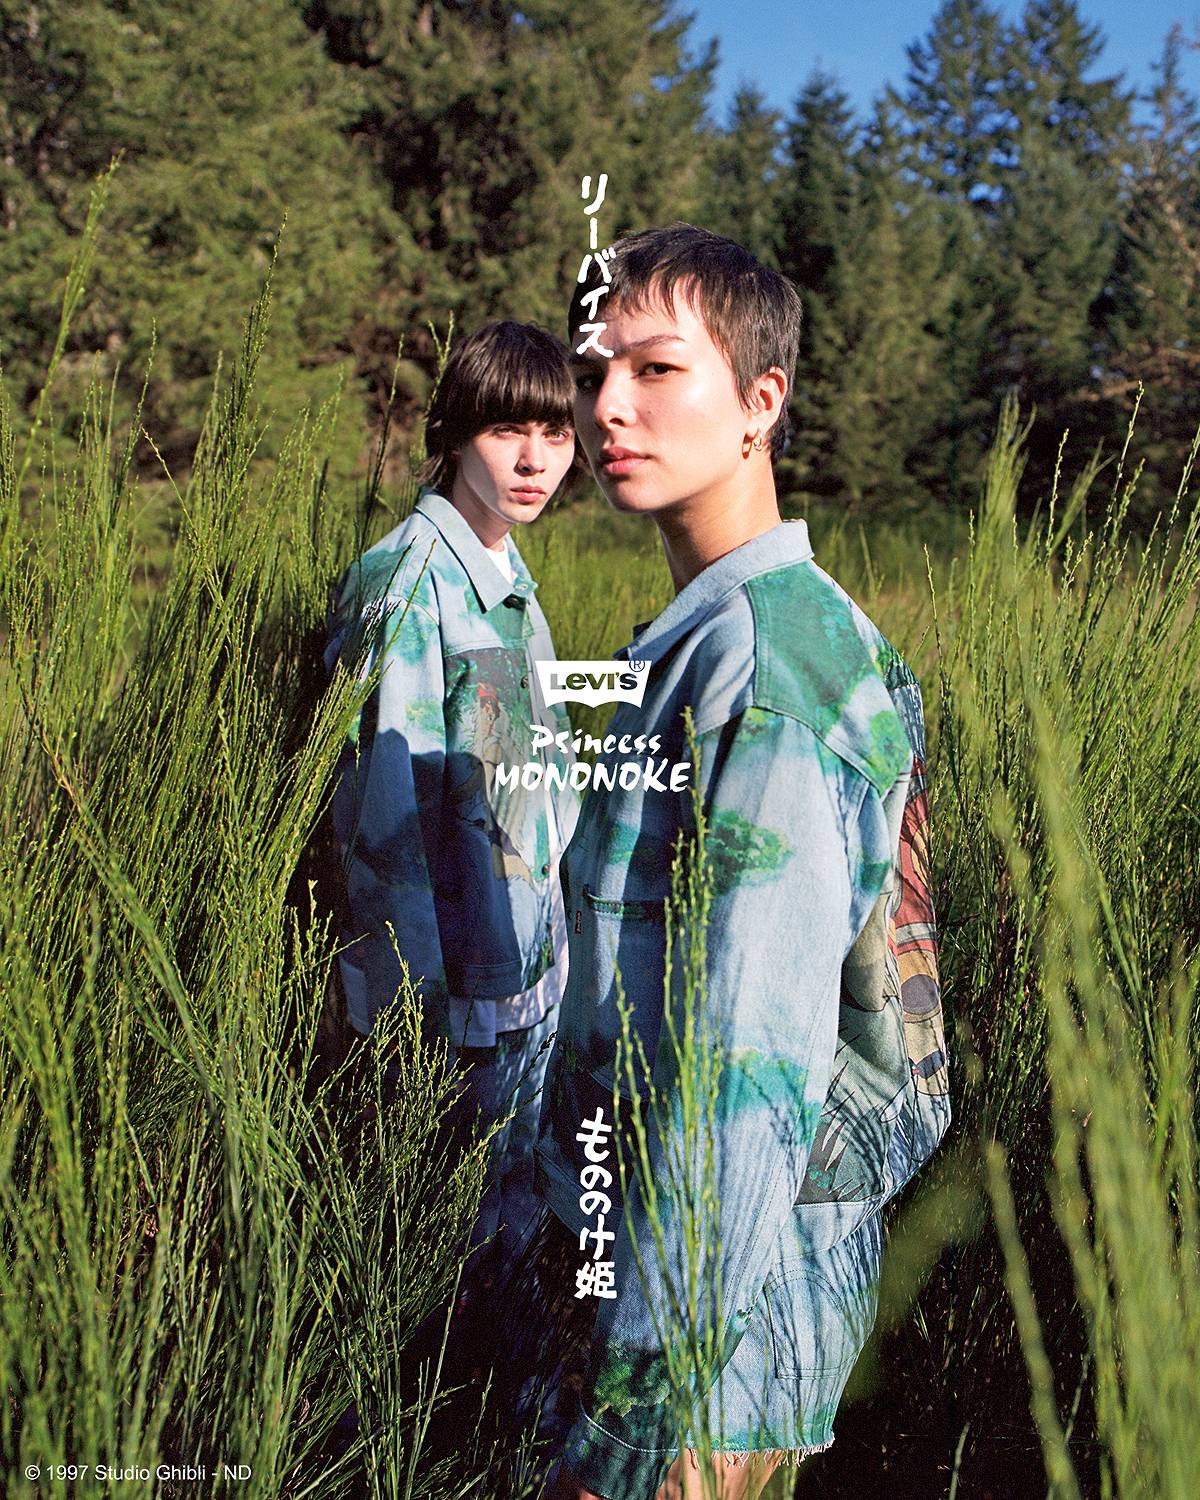 Image of two models wearing the Levi's® x Princess Mononoke collaboration trucker jackets, standing in a field of tall green grass.